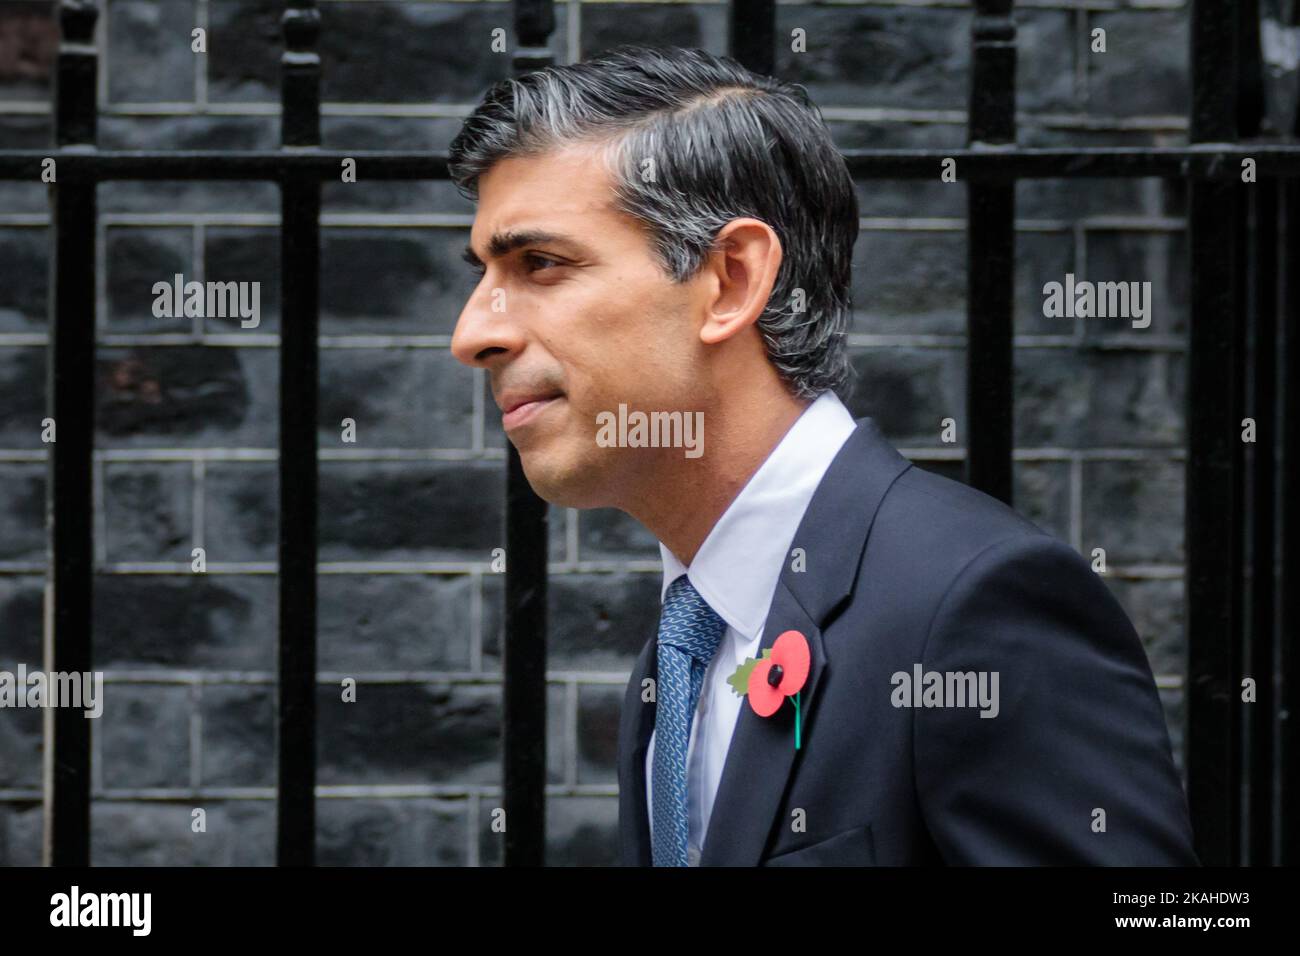 Downing Street, London, UK. 2nd November 2022.  Downing Street, London, UK. 2nd November 2022. British Prime Minister, Rishi Sunak, departs from Number 10 Downing Street to attend Prime Minister's Questions (PMQ) session in the House of Commons. Photo by Amanda Rose/Alamy Live News Stock Photo